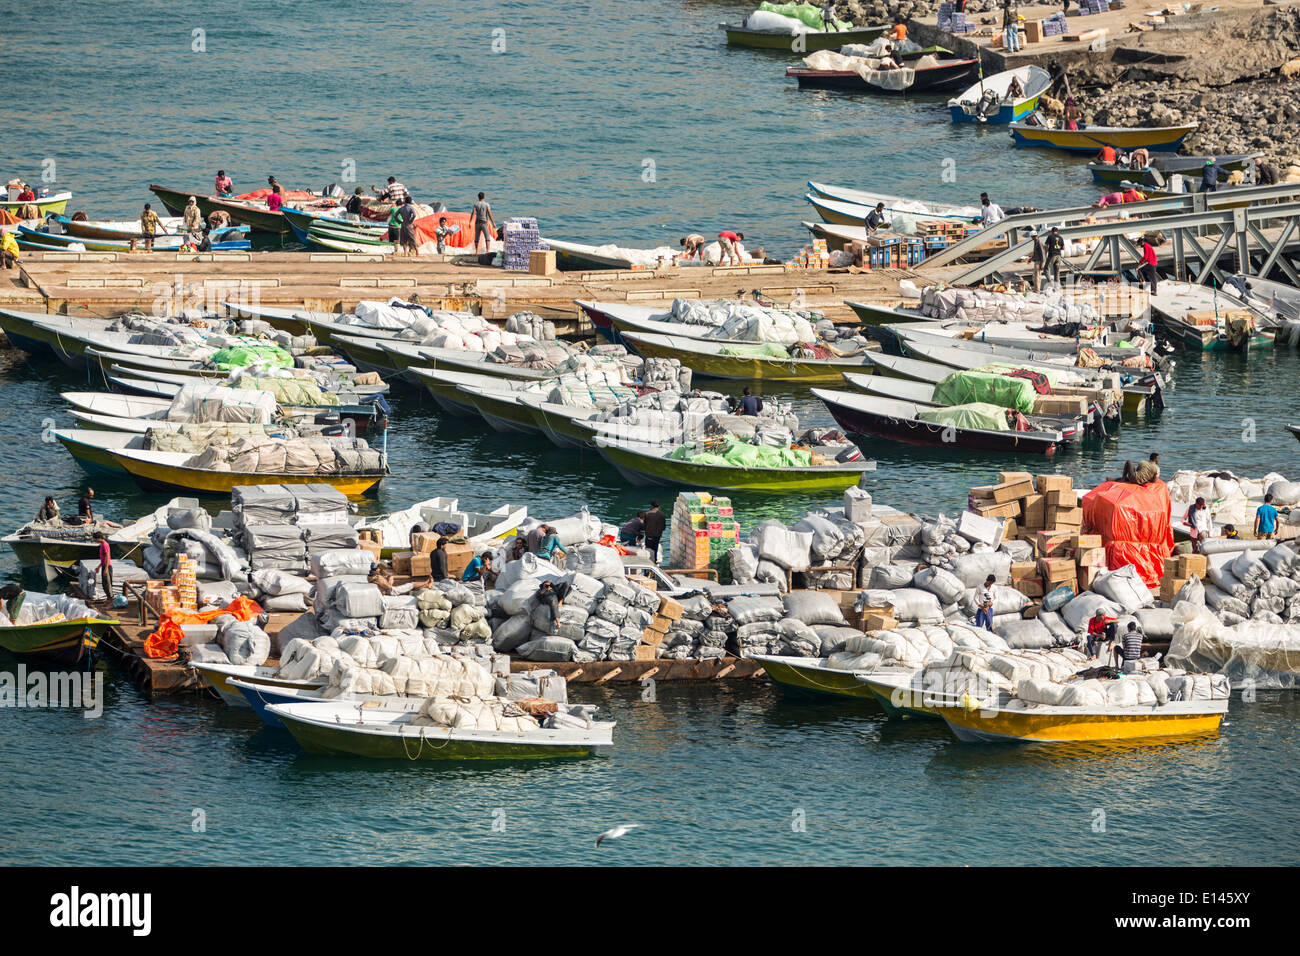 Oman, Khasab, Harbor, Iranian smugglers agricultural products to Oman and luxury goods back to Iran with small boats Stock Photo